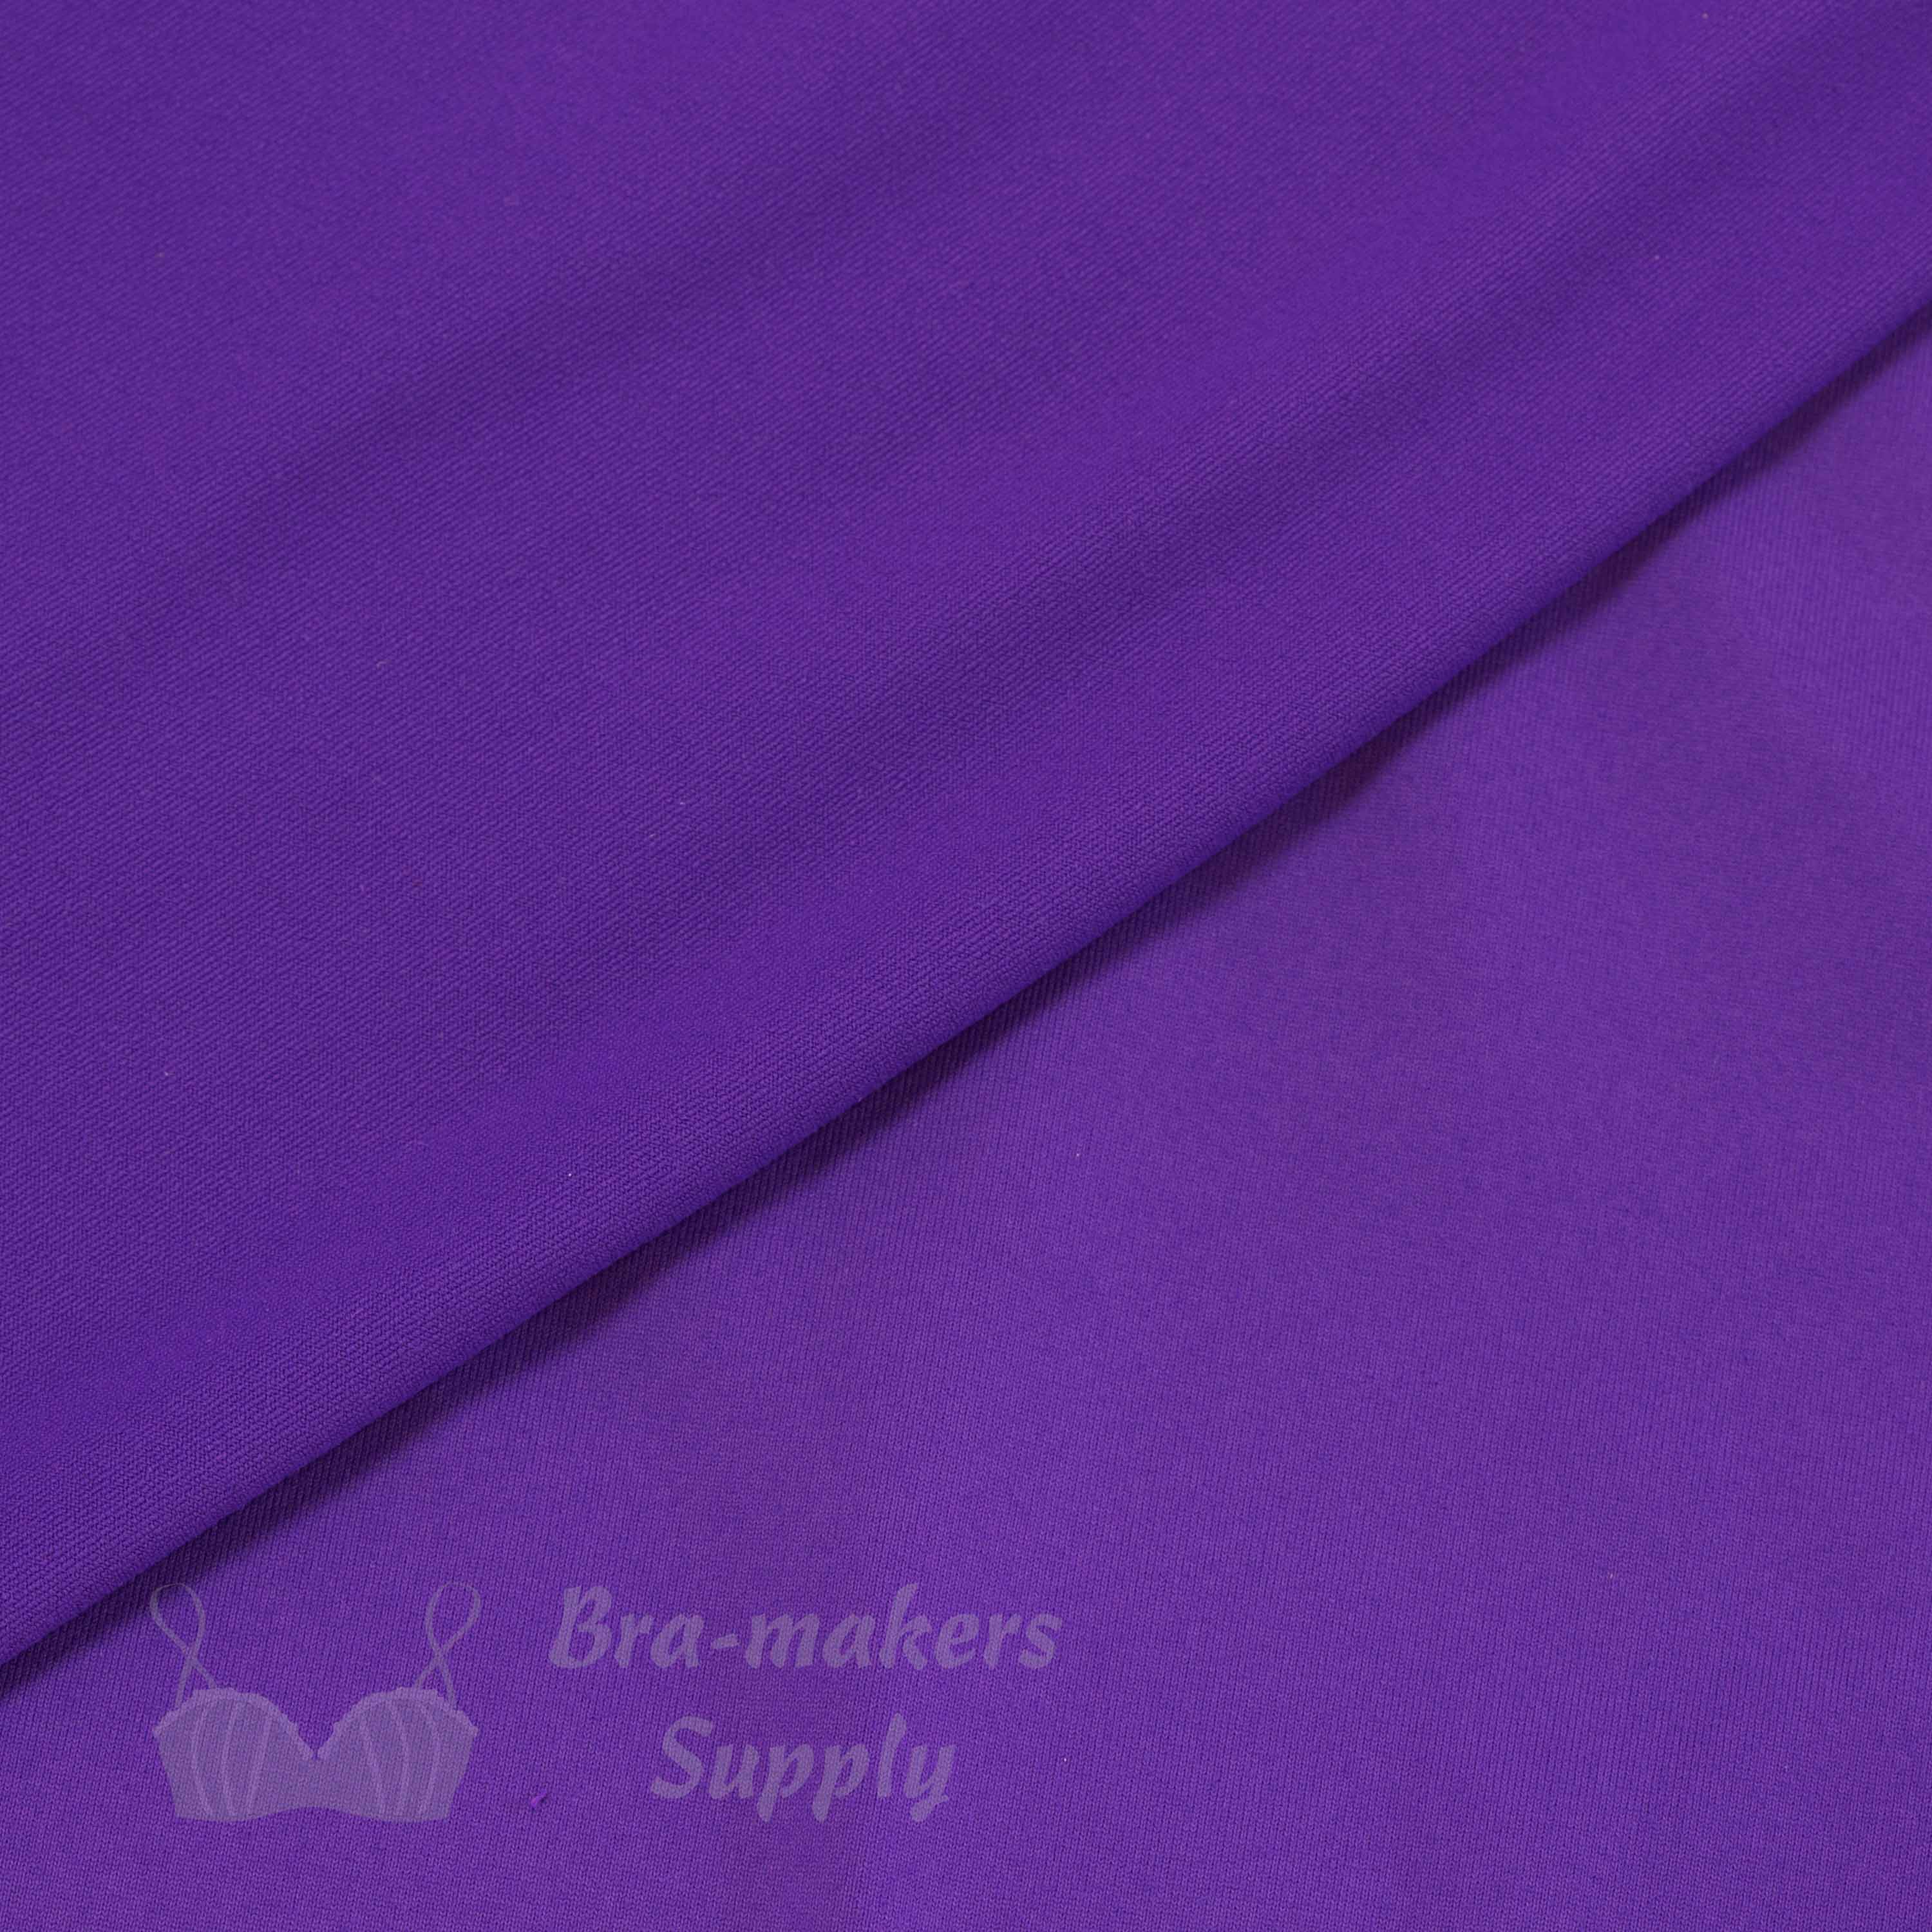 Lining and Padding Fabrics - from Bra-Makers Supply